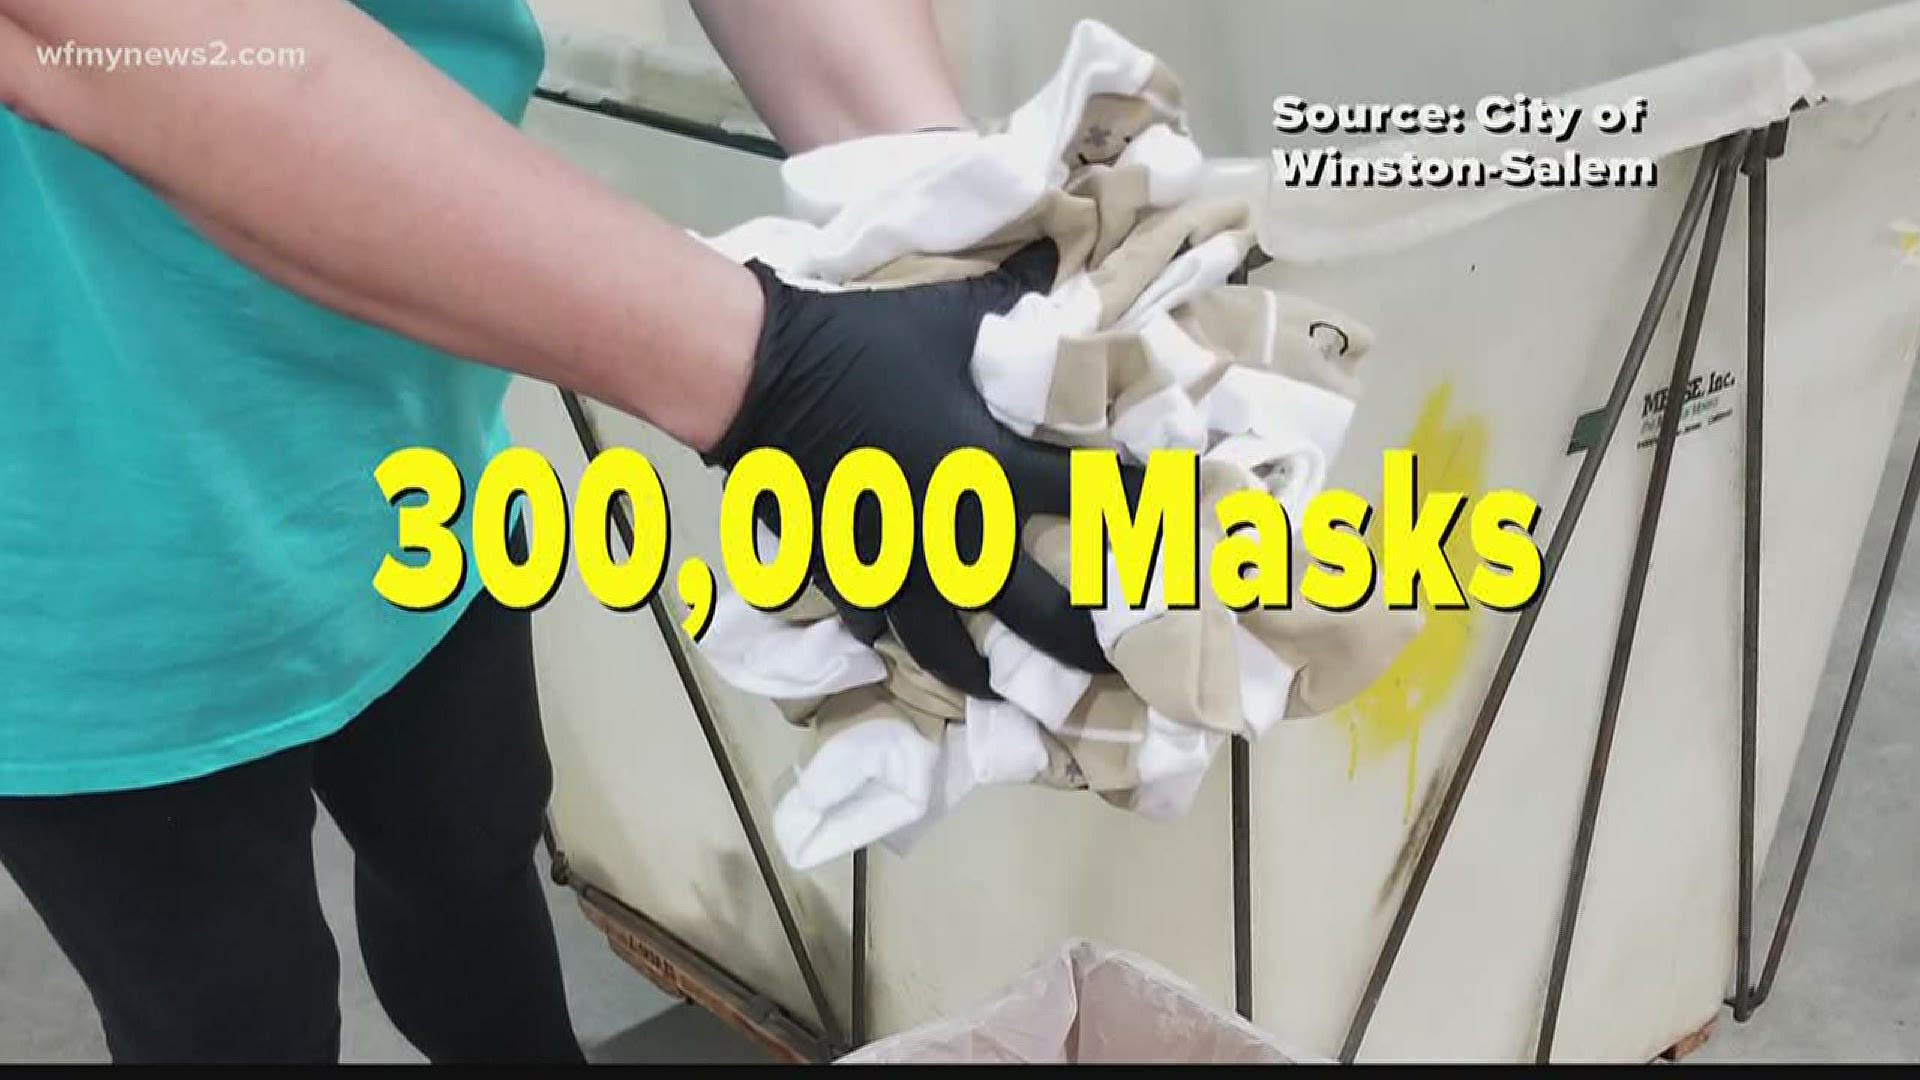 One Triad city wants everyone to wear masks when they go outside. They're willing to provide hundreds of thousands to make it happen.